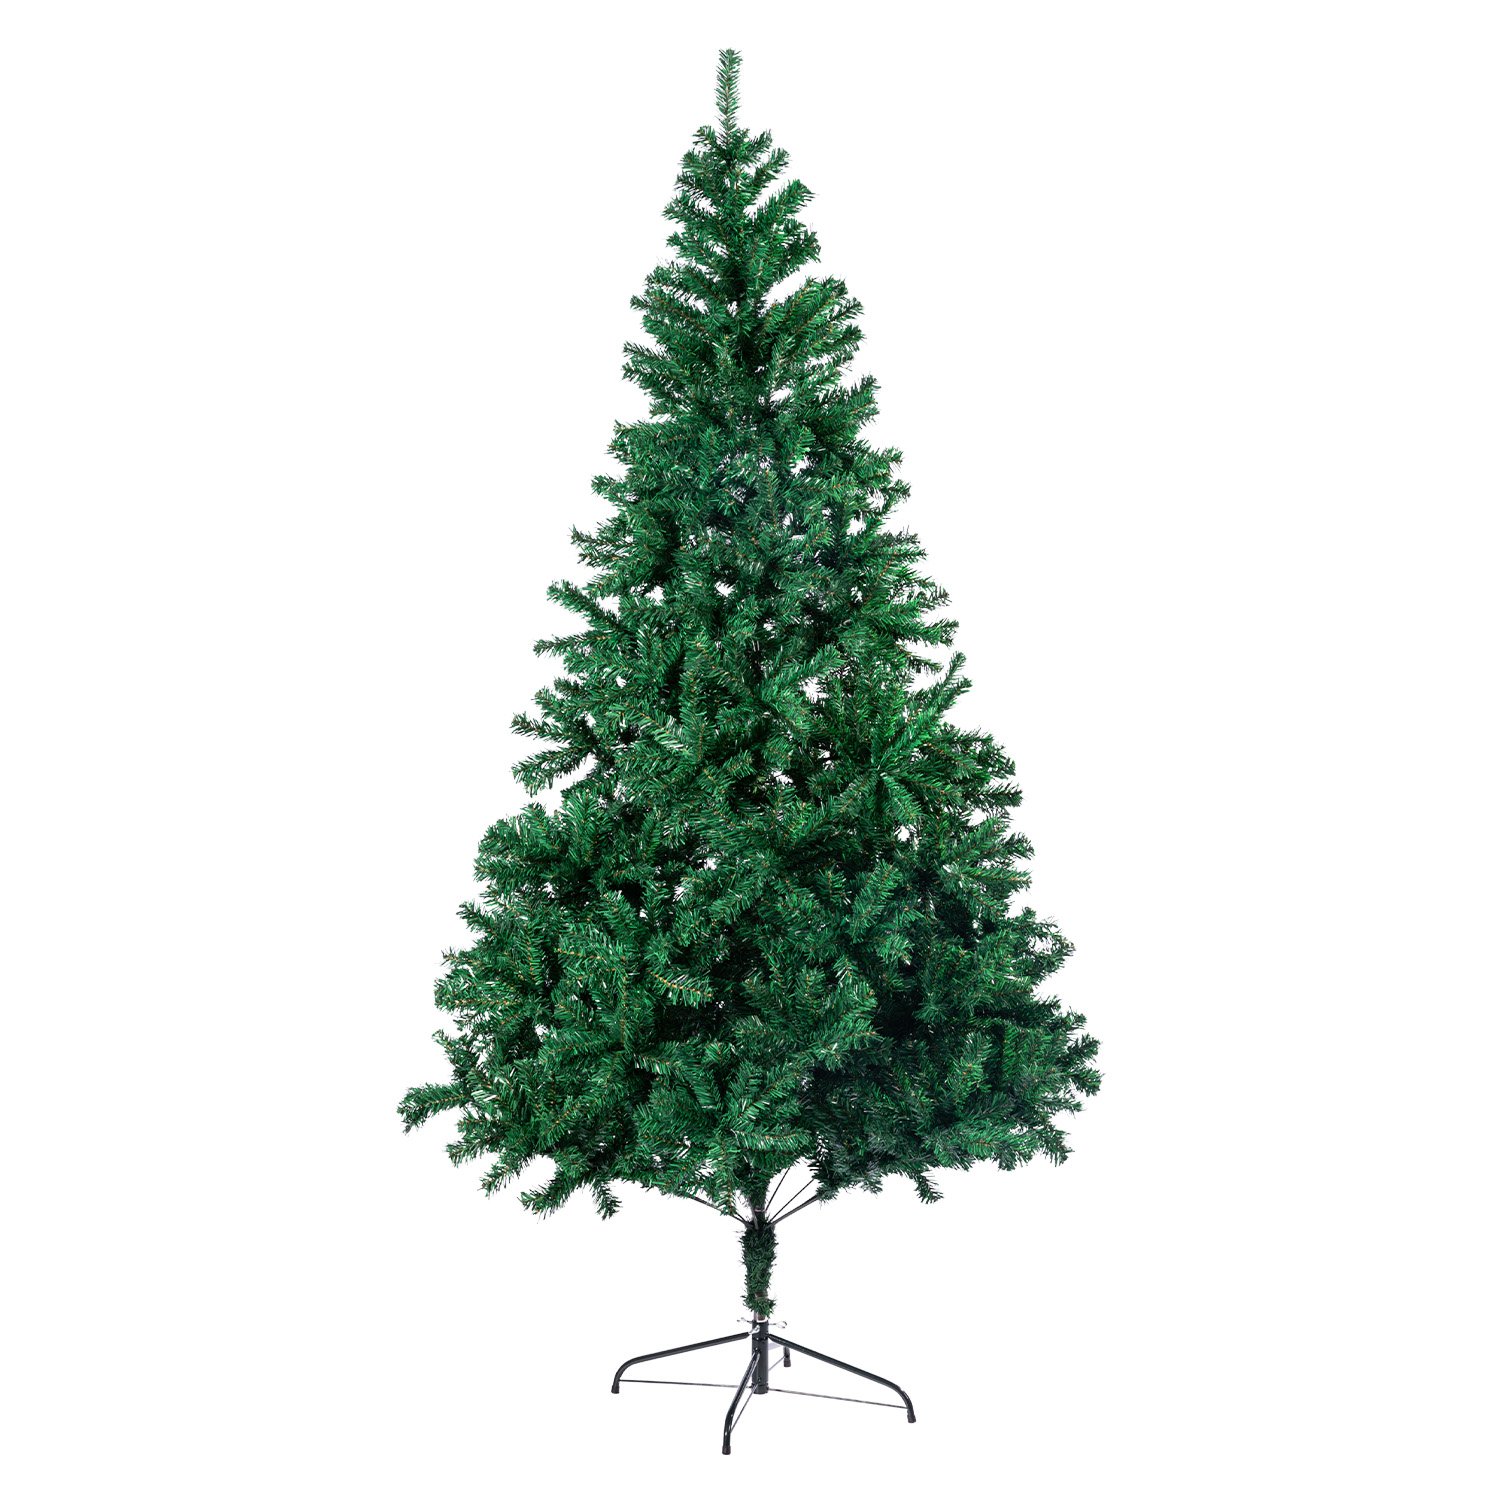 Christabelle Green Artificial Christmas Tree 1.5m - 550 Tips 2